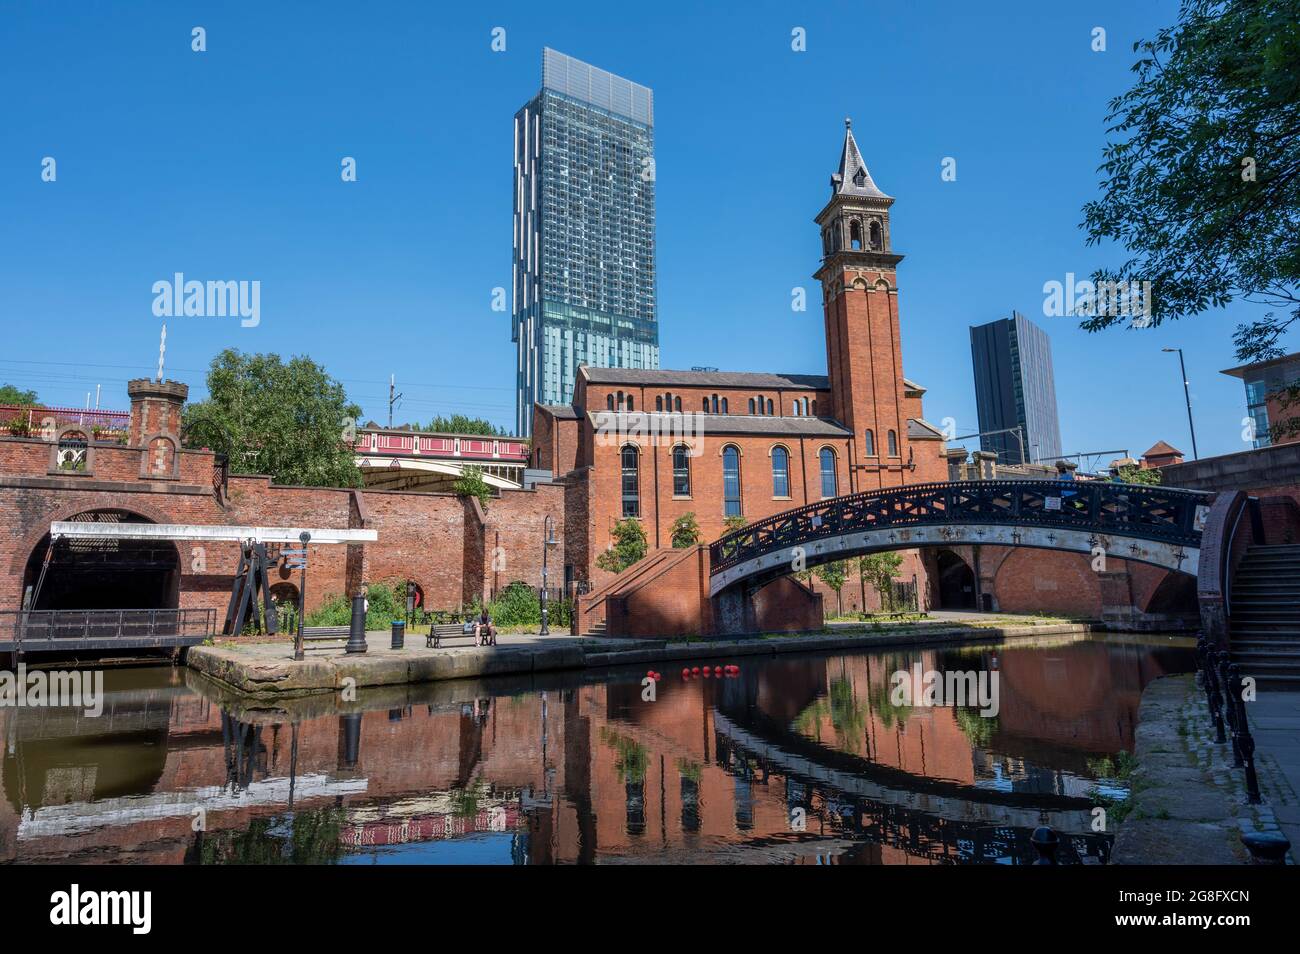 Castlefield Canal Basin, Manchester, Angleterre, Royaume-Uni, Europe Banque D'Images